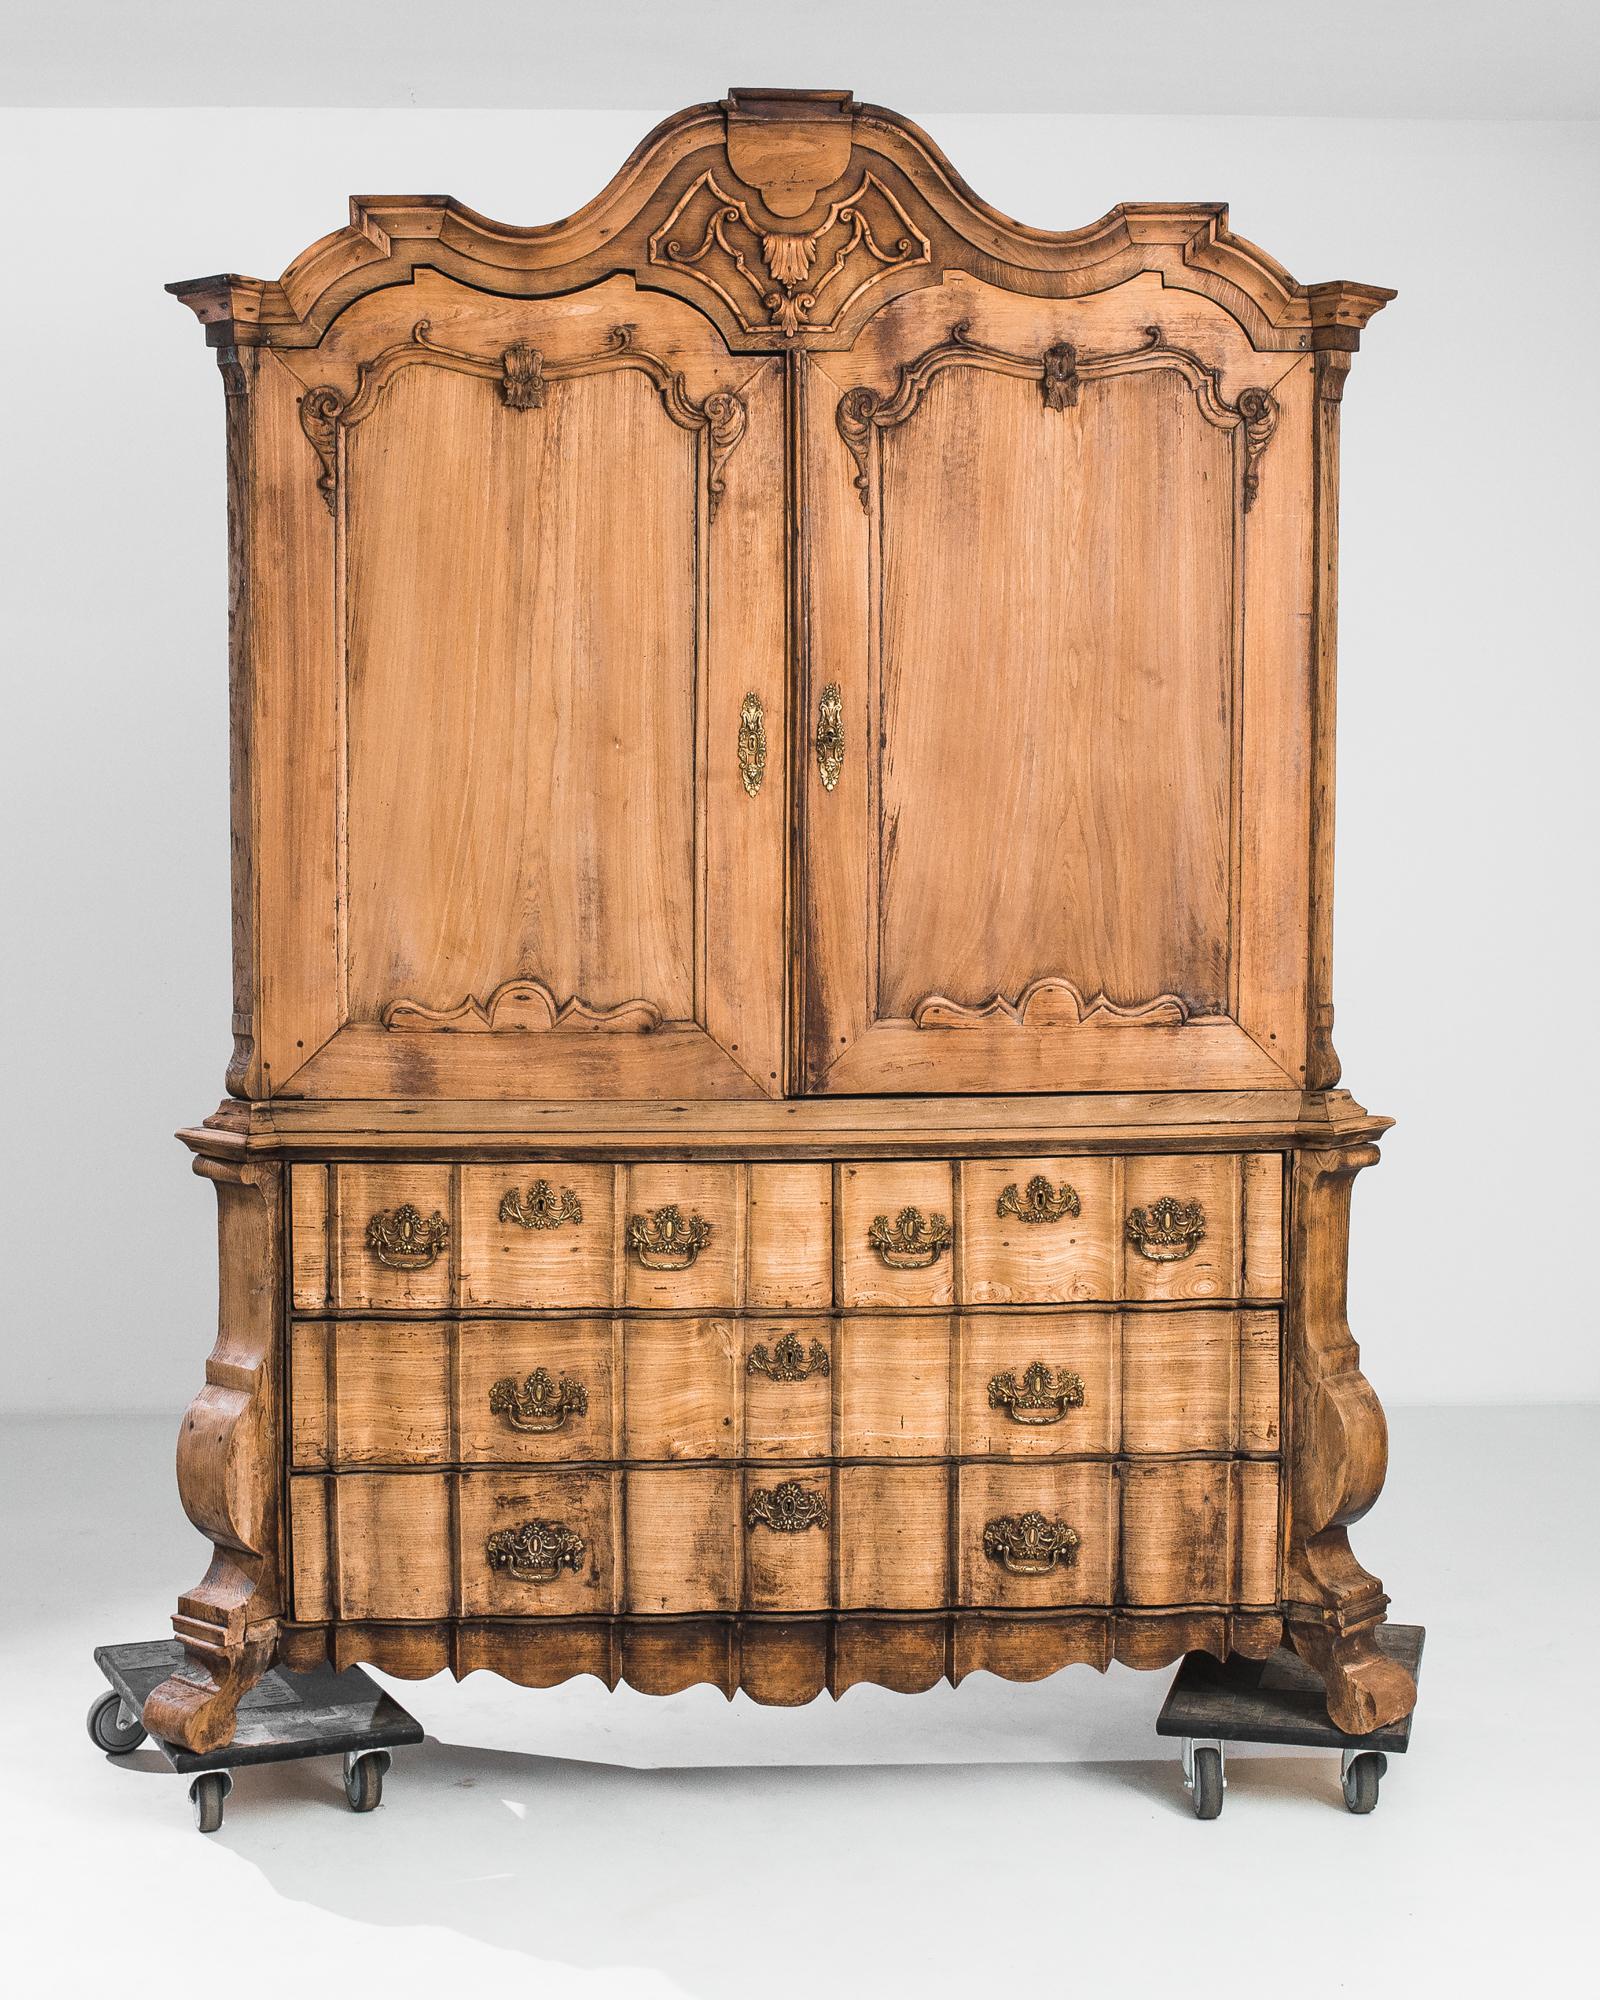 This 1780s Dutch Wooden Cabinet is an exquisite specimen of the refined craftsmanship from the period. Its robust wooden structure is adorned with ornate carvings and a curved bonnet top that exudes the grandeur of the era. The warm, natural patina